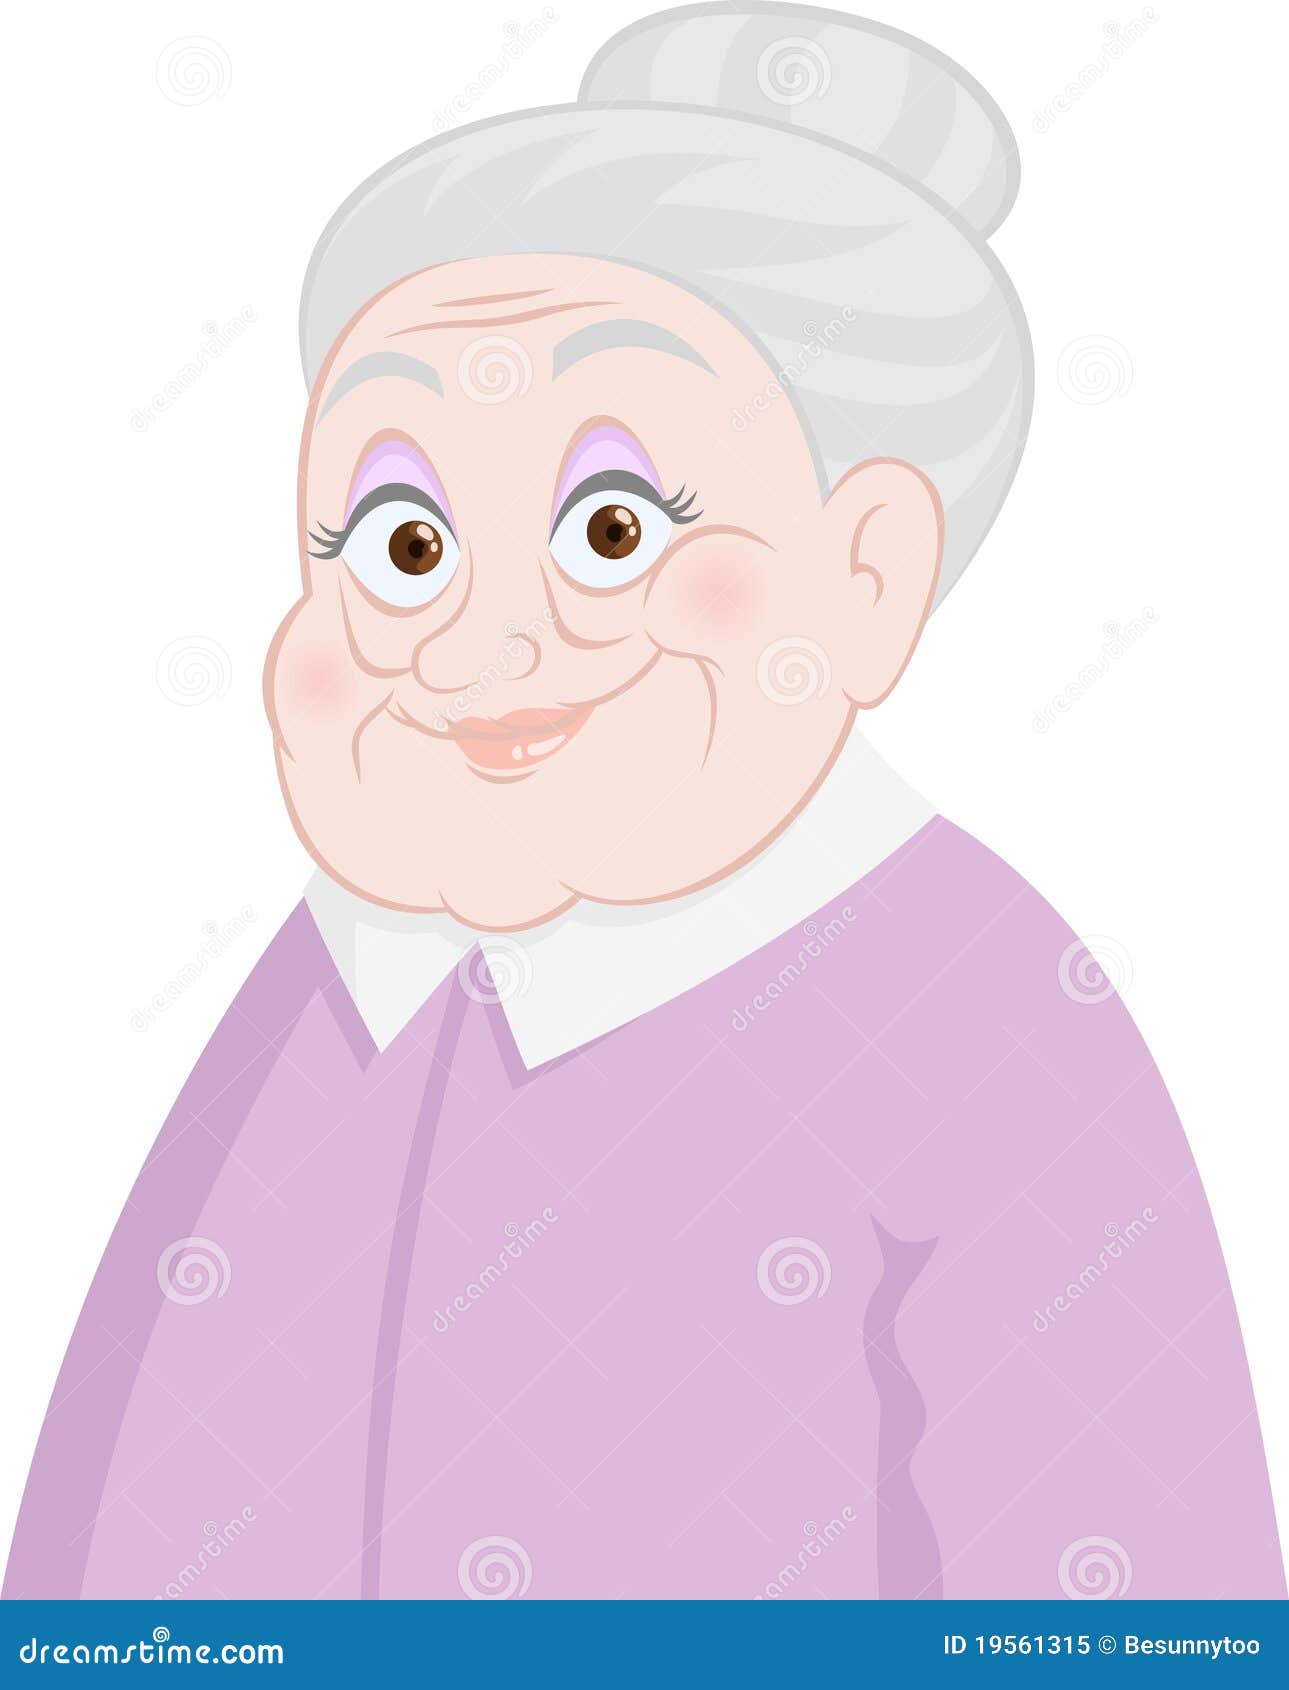 Old lady stock vector. Image of grey, aged, cartoon, caucasian - 19561315